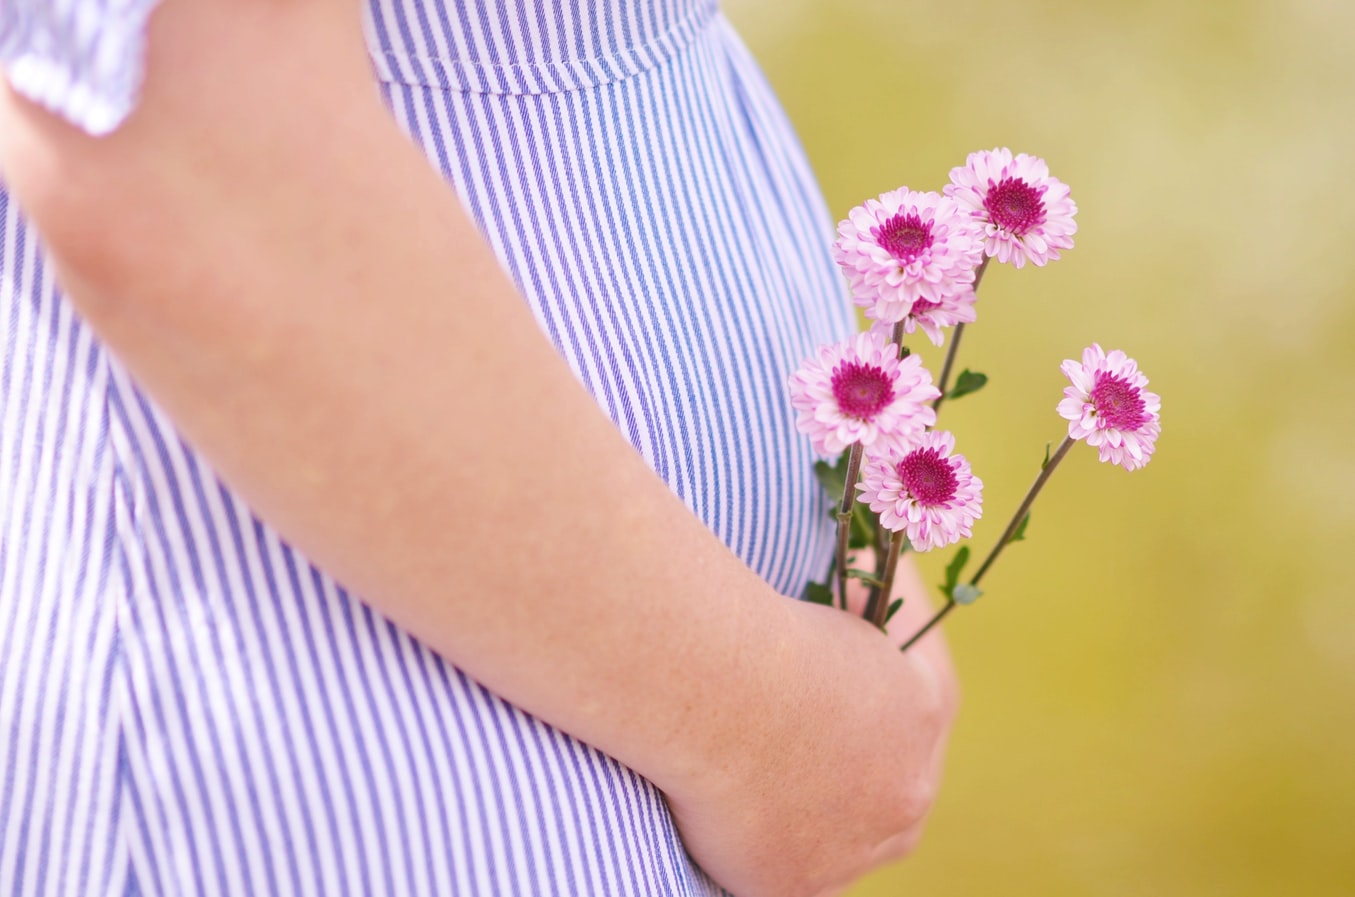 Important facts about the surrogate mothers from different countries